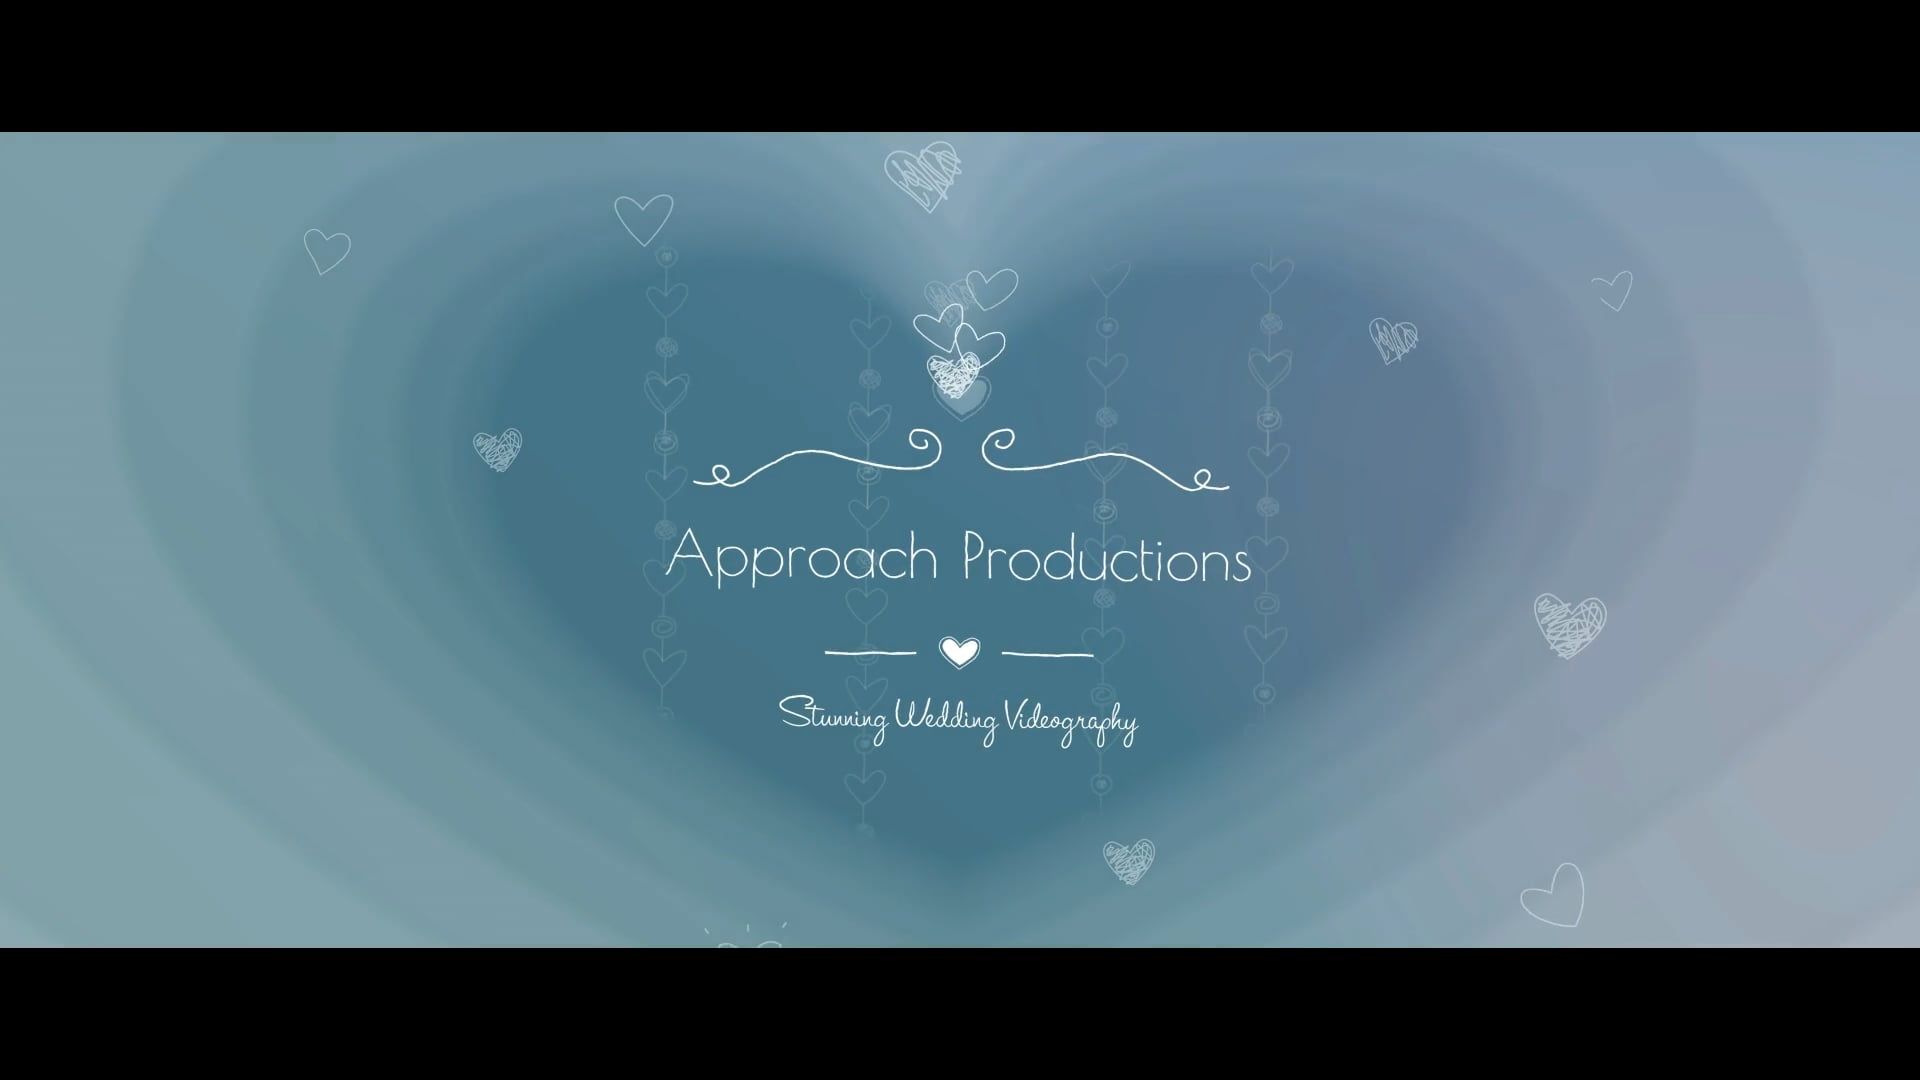 Welcome to Approach Productions!